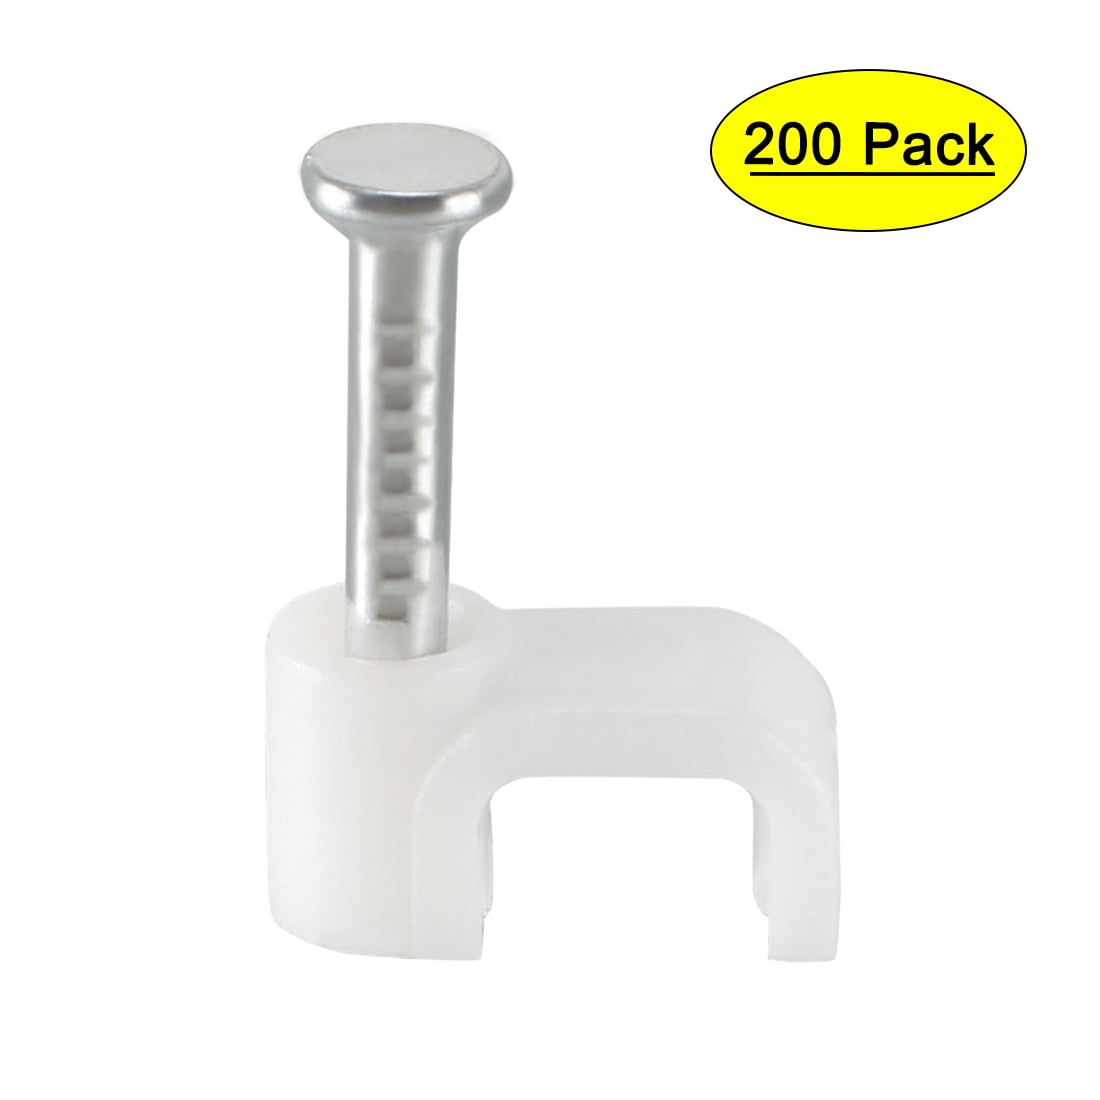 Details about   100 X 7mm SATELLITE & AERIAL COAX CABLE CLIPS ELECTRICAL CLIPS FAST & FREE 